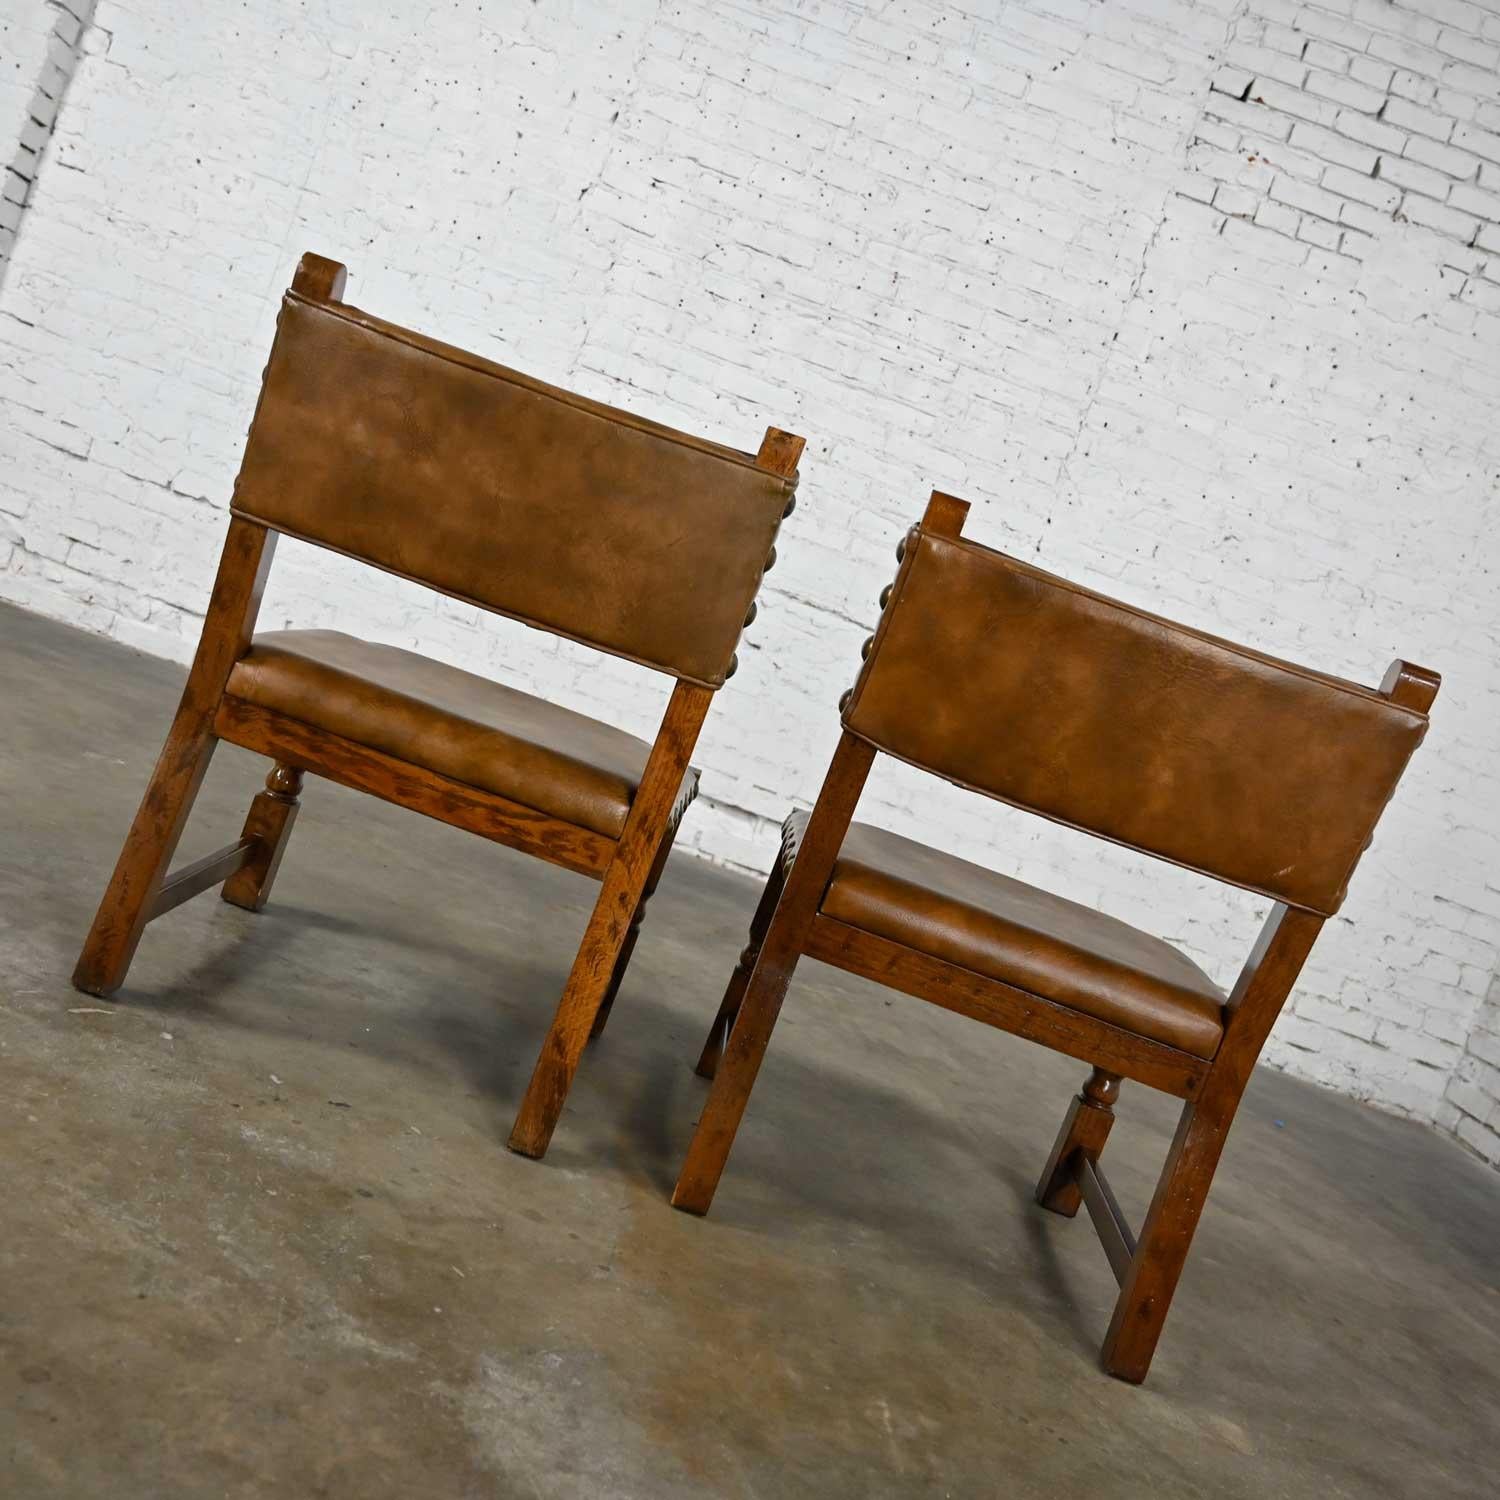 Vintage Spanish Revival Oak Pair of Chairs with Tooled Cognac Faux Leather Seat For Sale 2